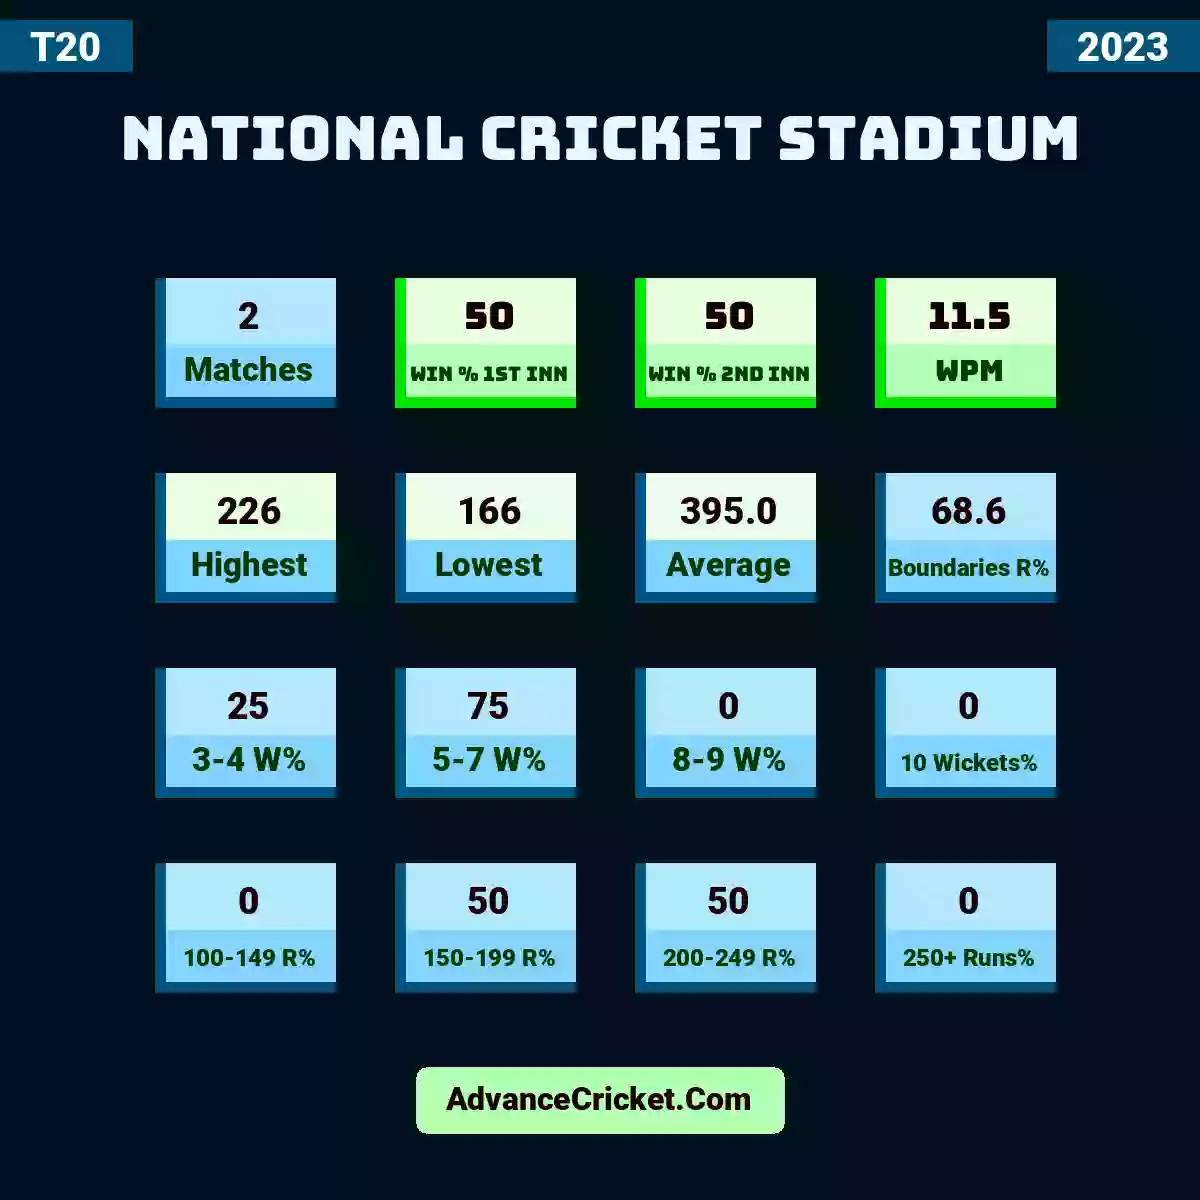 Image showing National Cricket Stadium with Matches: 2, Win % 1st Inn: 50, Win % 2nd Inn: 50, WPM: 11.5, Highest: 226, Lowest: 166, Average: 395.0, Boundaries R%: 68.6, 3-4 W%: 25, 5-7 W%: 75, 8-9 W%: 0, 10 Wickets%: 0, 100-149 R%: 0, 150-199 R%: 50, 200-249 R%: 50, 250+ Runs%: 0.